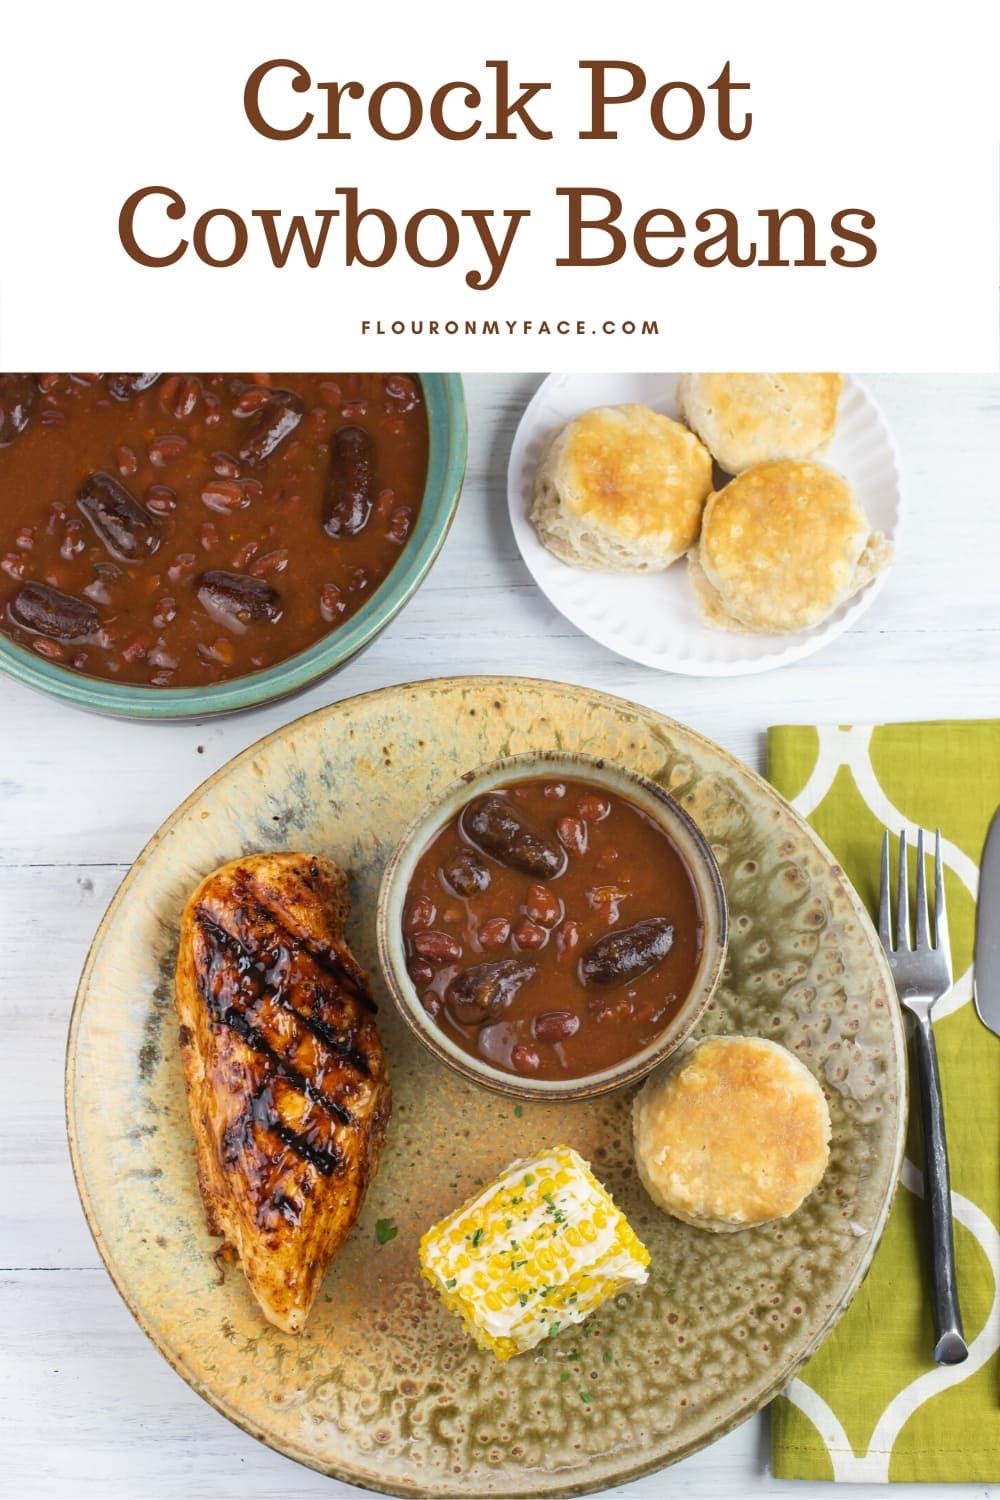 A plate with grilled chicken, corn, biscuit and a small serving bowl of Crock Cowboy Beans 